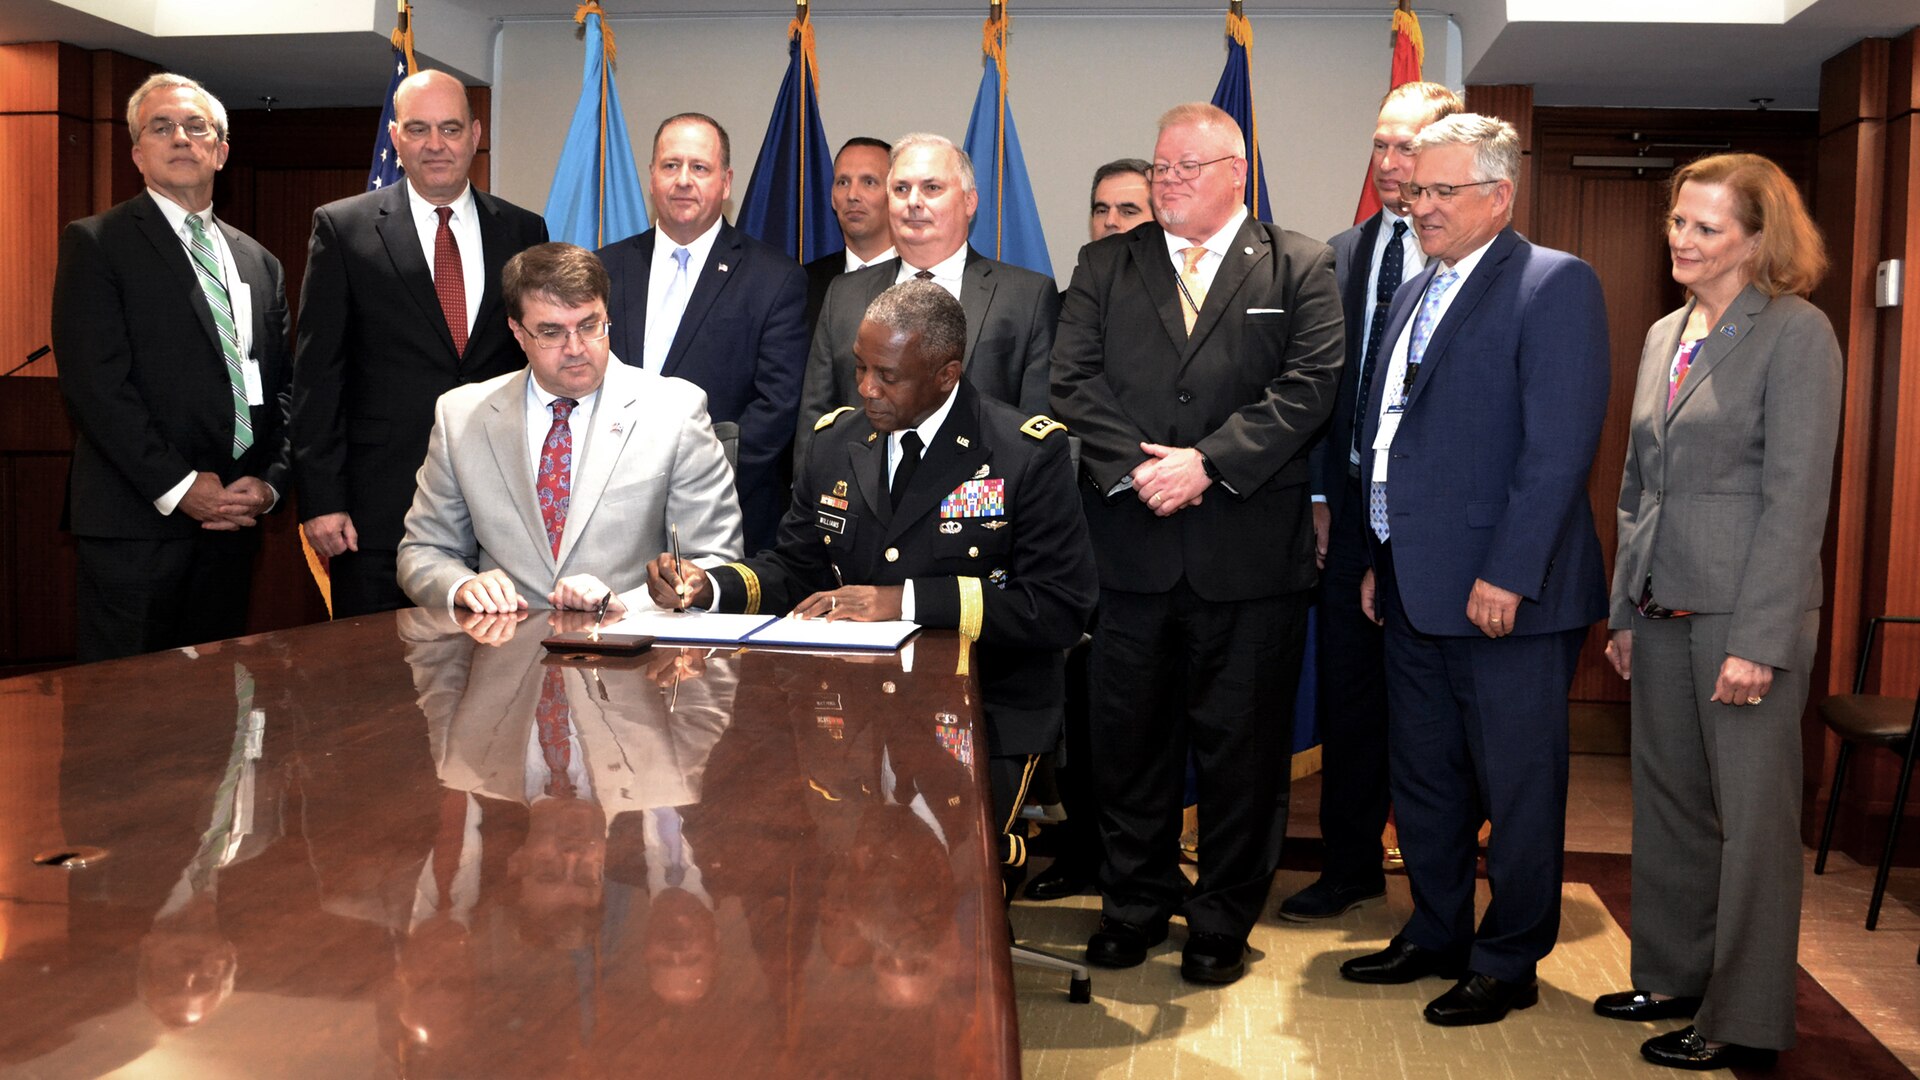 Two people seated at the end of a long conference table, looking down while signing a document with a crowd standing behind them